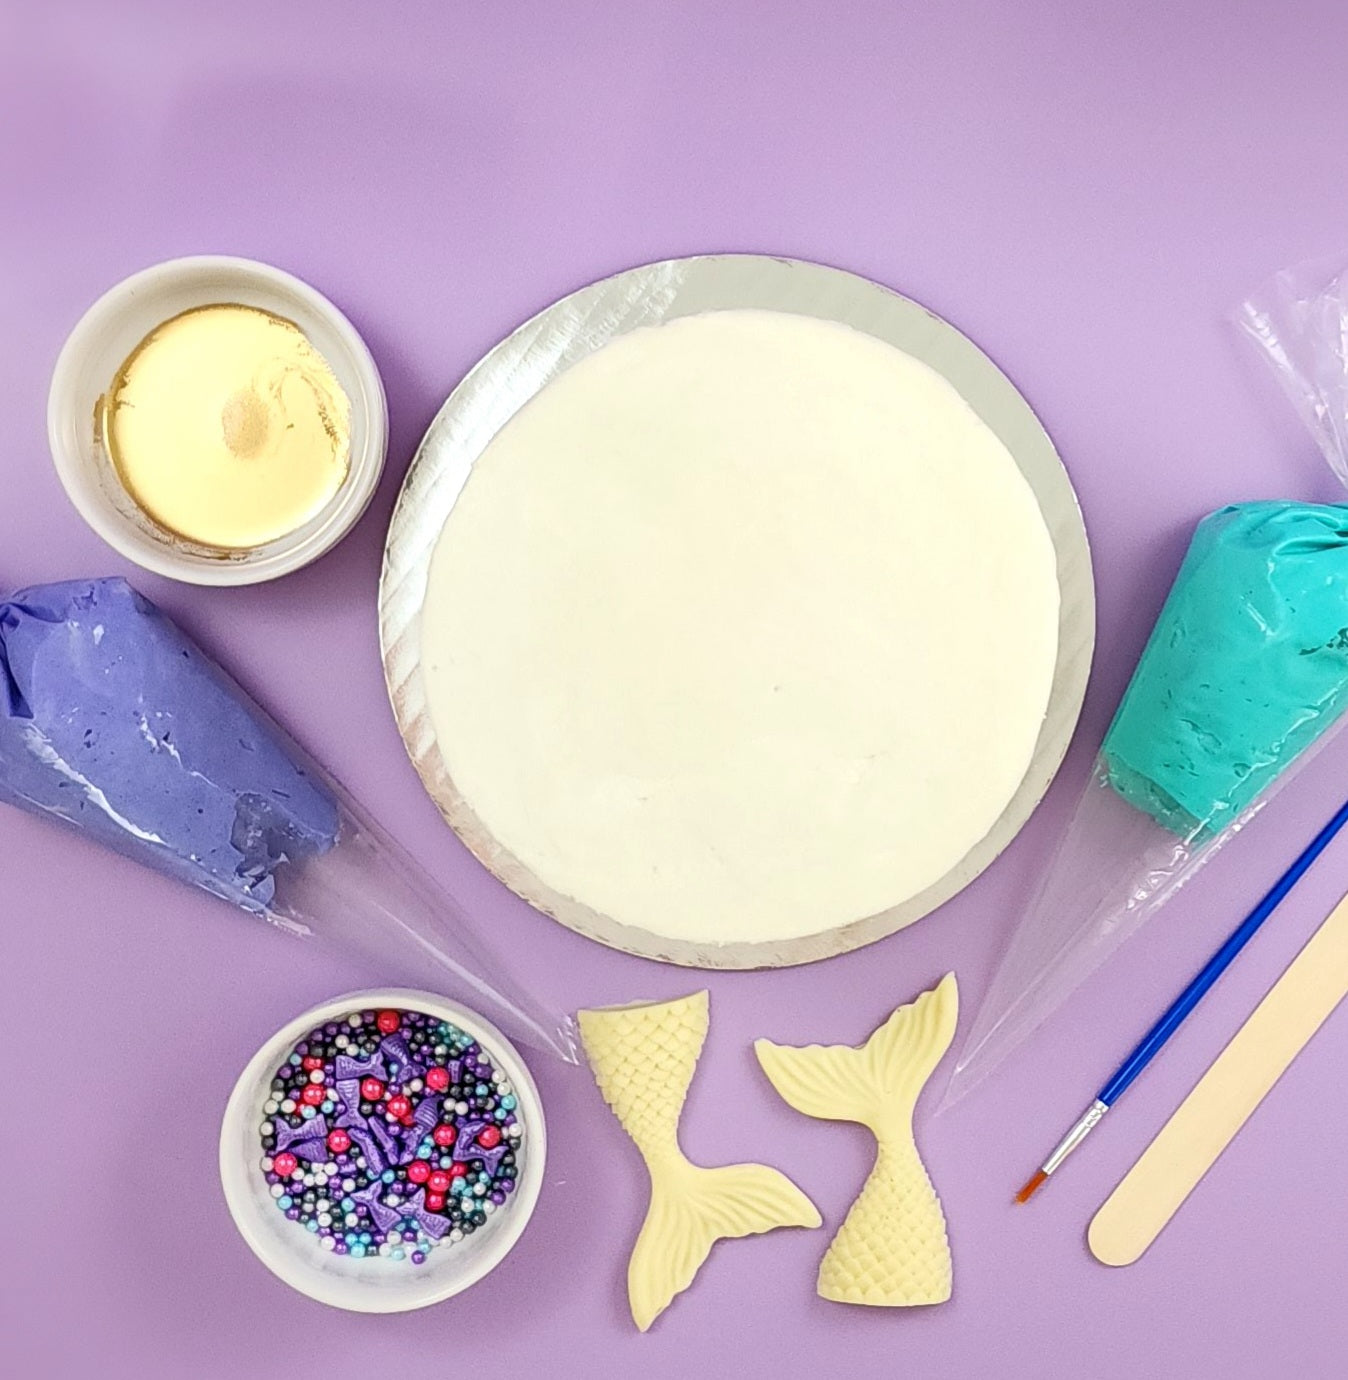 A colorful array of the tools and ingredients you receive with this DIY mermaid cake kit: gold paint, purple and teal frosting in piping bags, a paintbrush, a wood spatula, two white chocolate mermaid tales, sprinkle mix with purple, pink, white, blue, and gray sprinkles, and a cake frosted in white vanilla buttercream. Not shown is the easy-to-follow instruction card you will also receive.